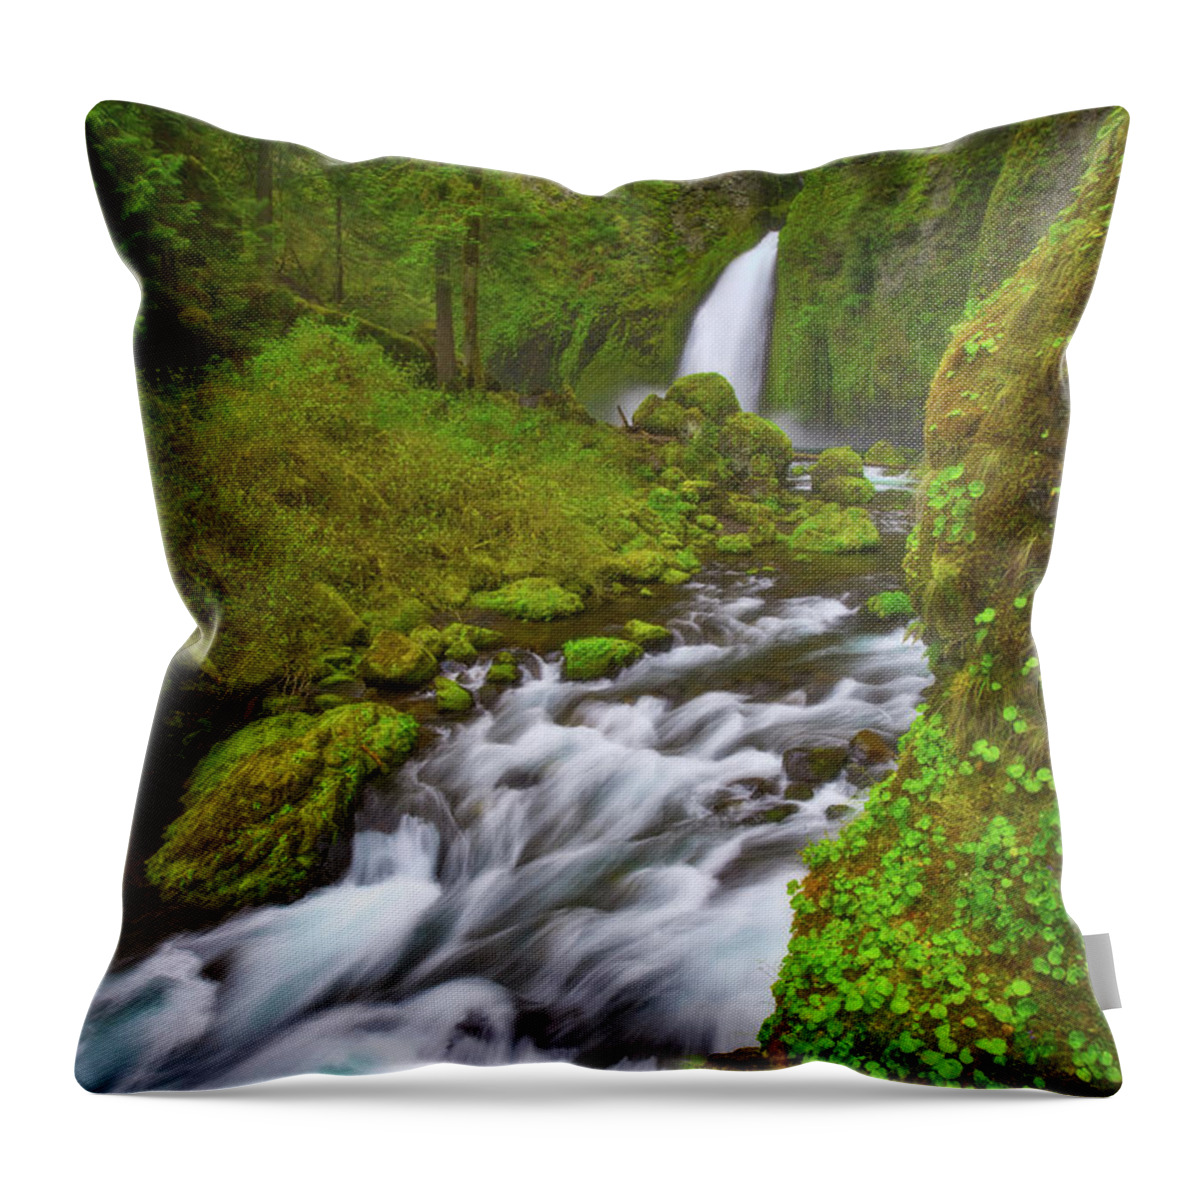 Waterfall Throw Pillow featuring the photograph Wahclella Falls by Darren White